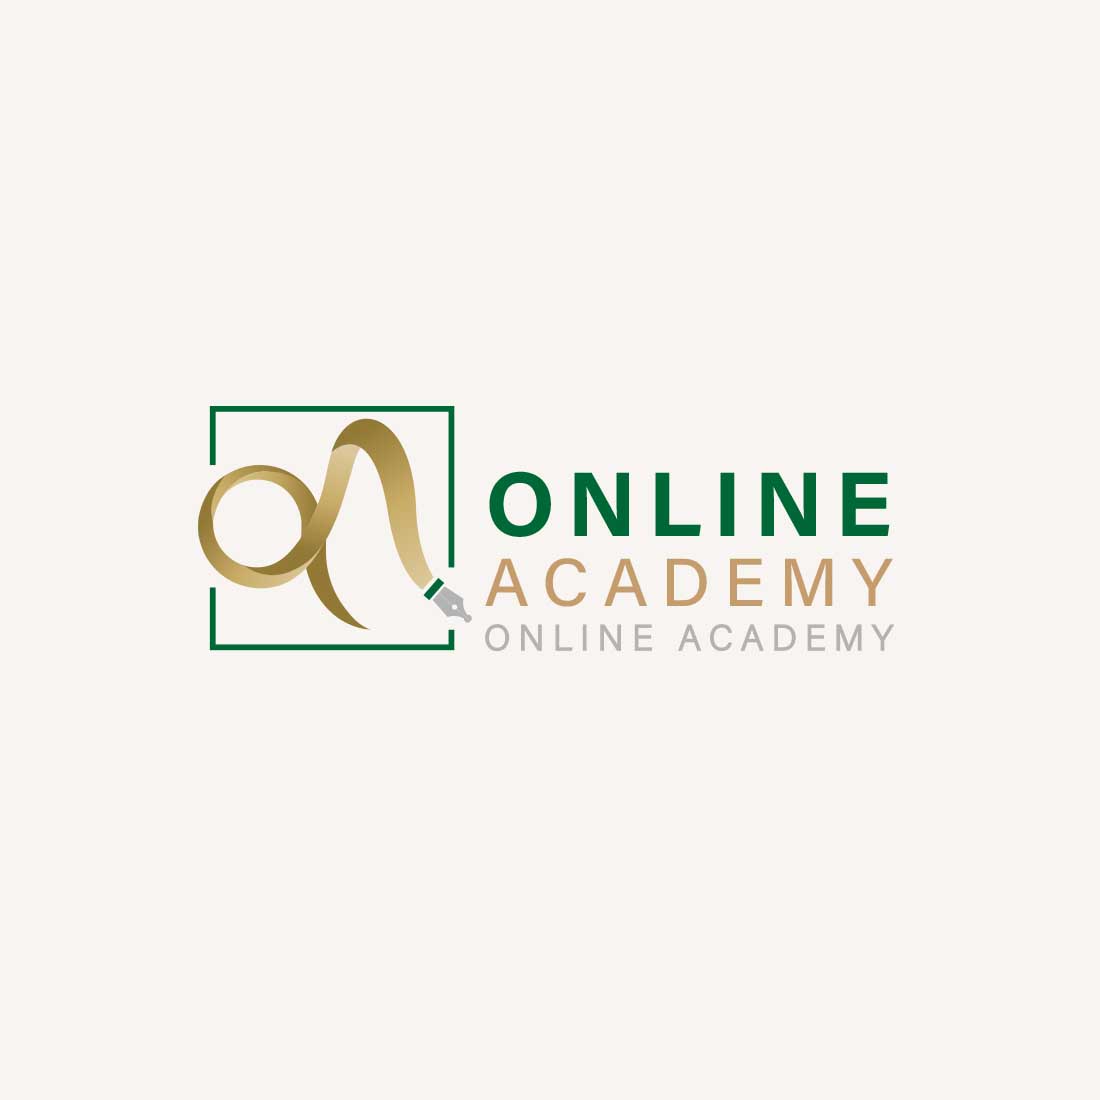 Image with the name of the online academy.